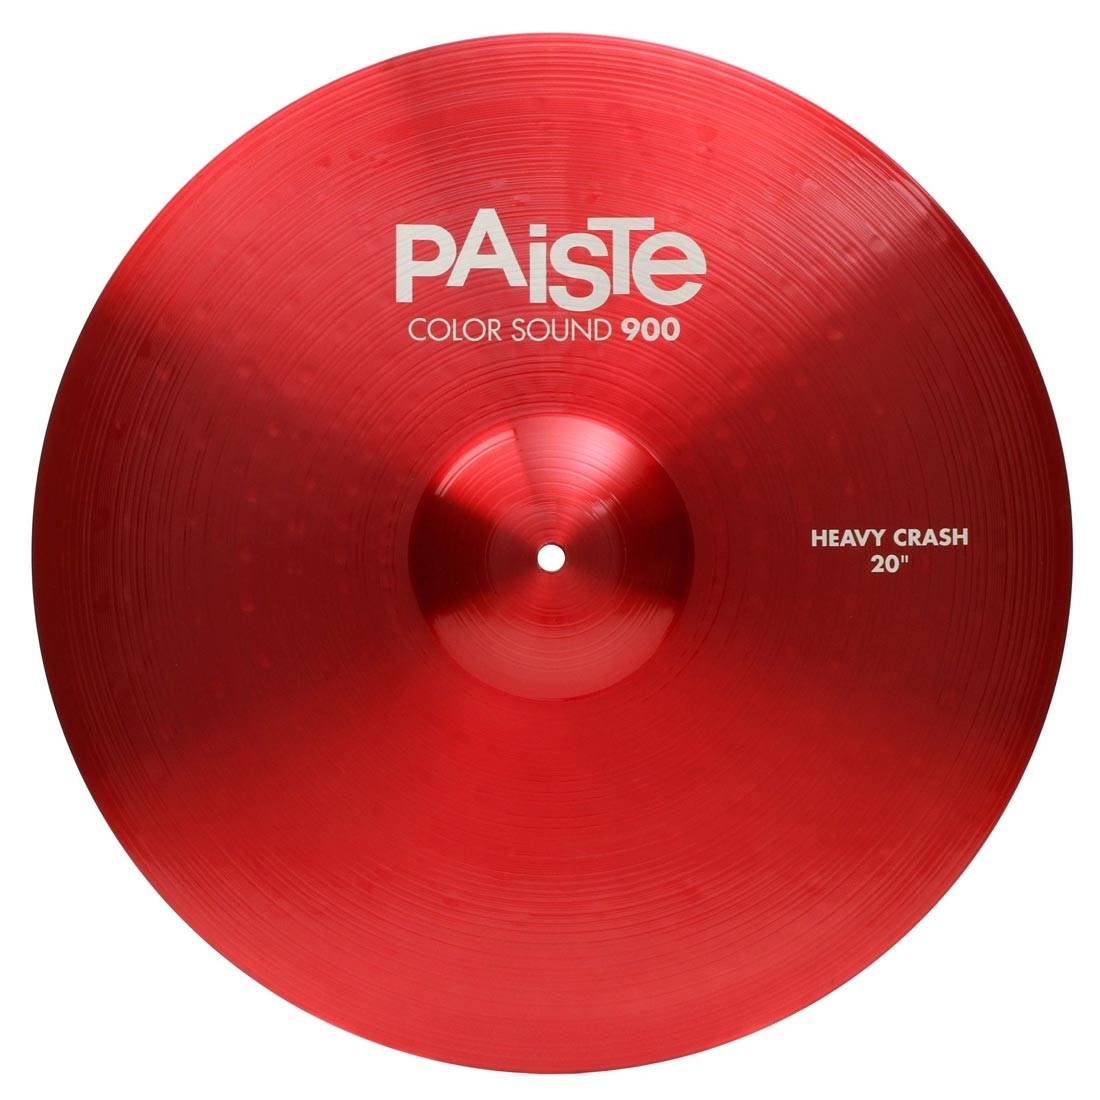 PAISTE 900 Color Sound 20'' Red Heavy Crash Cymbal